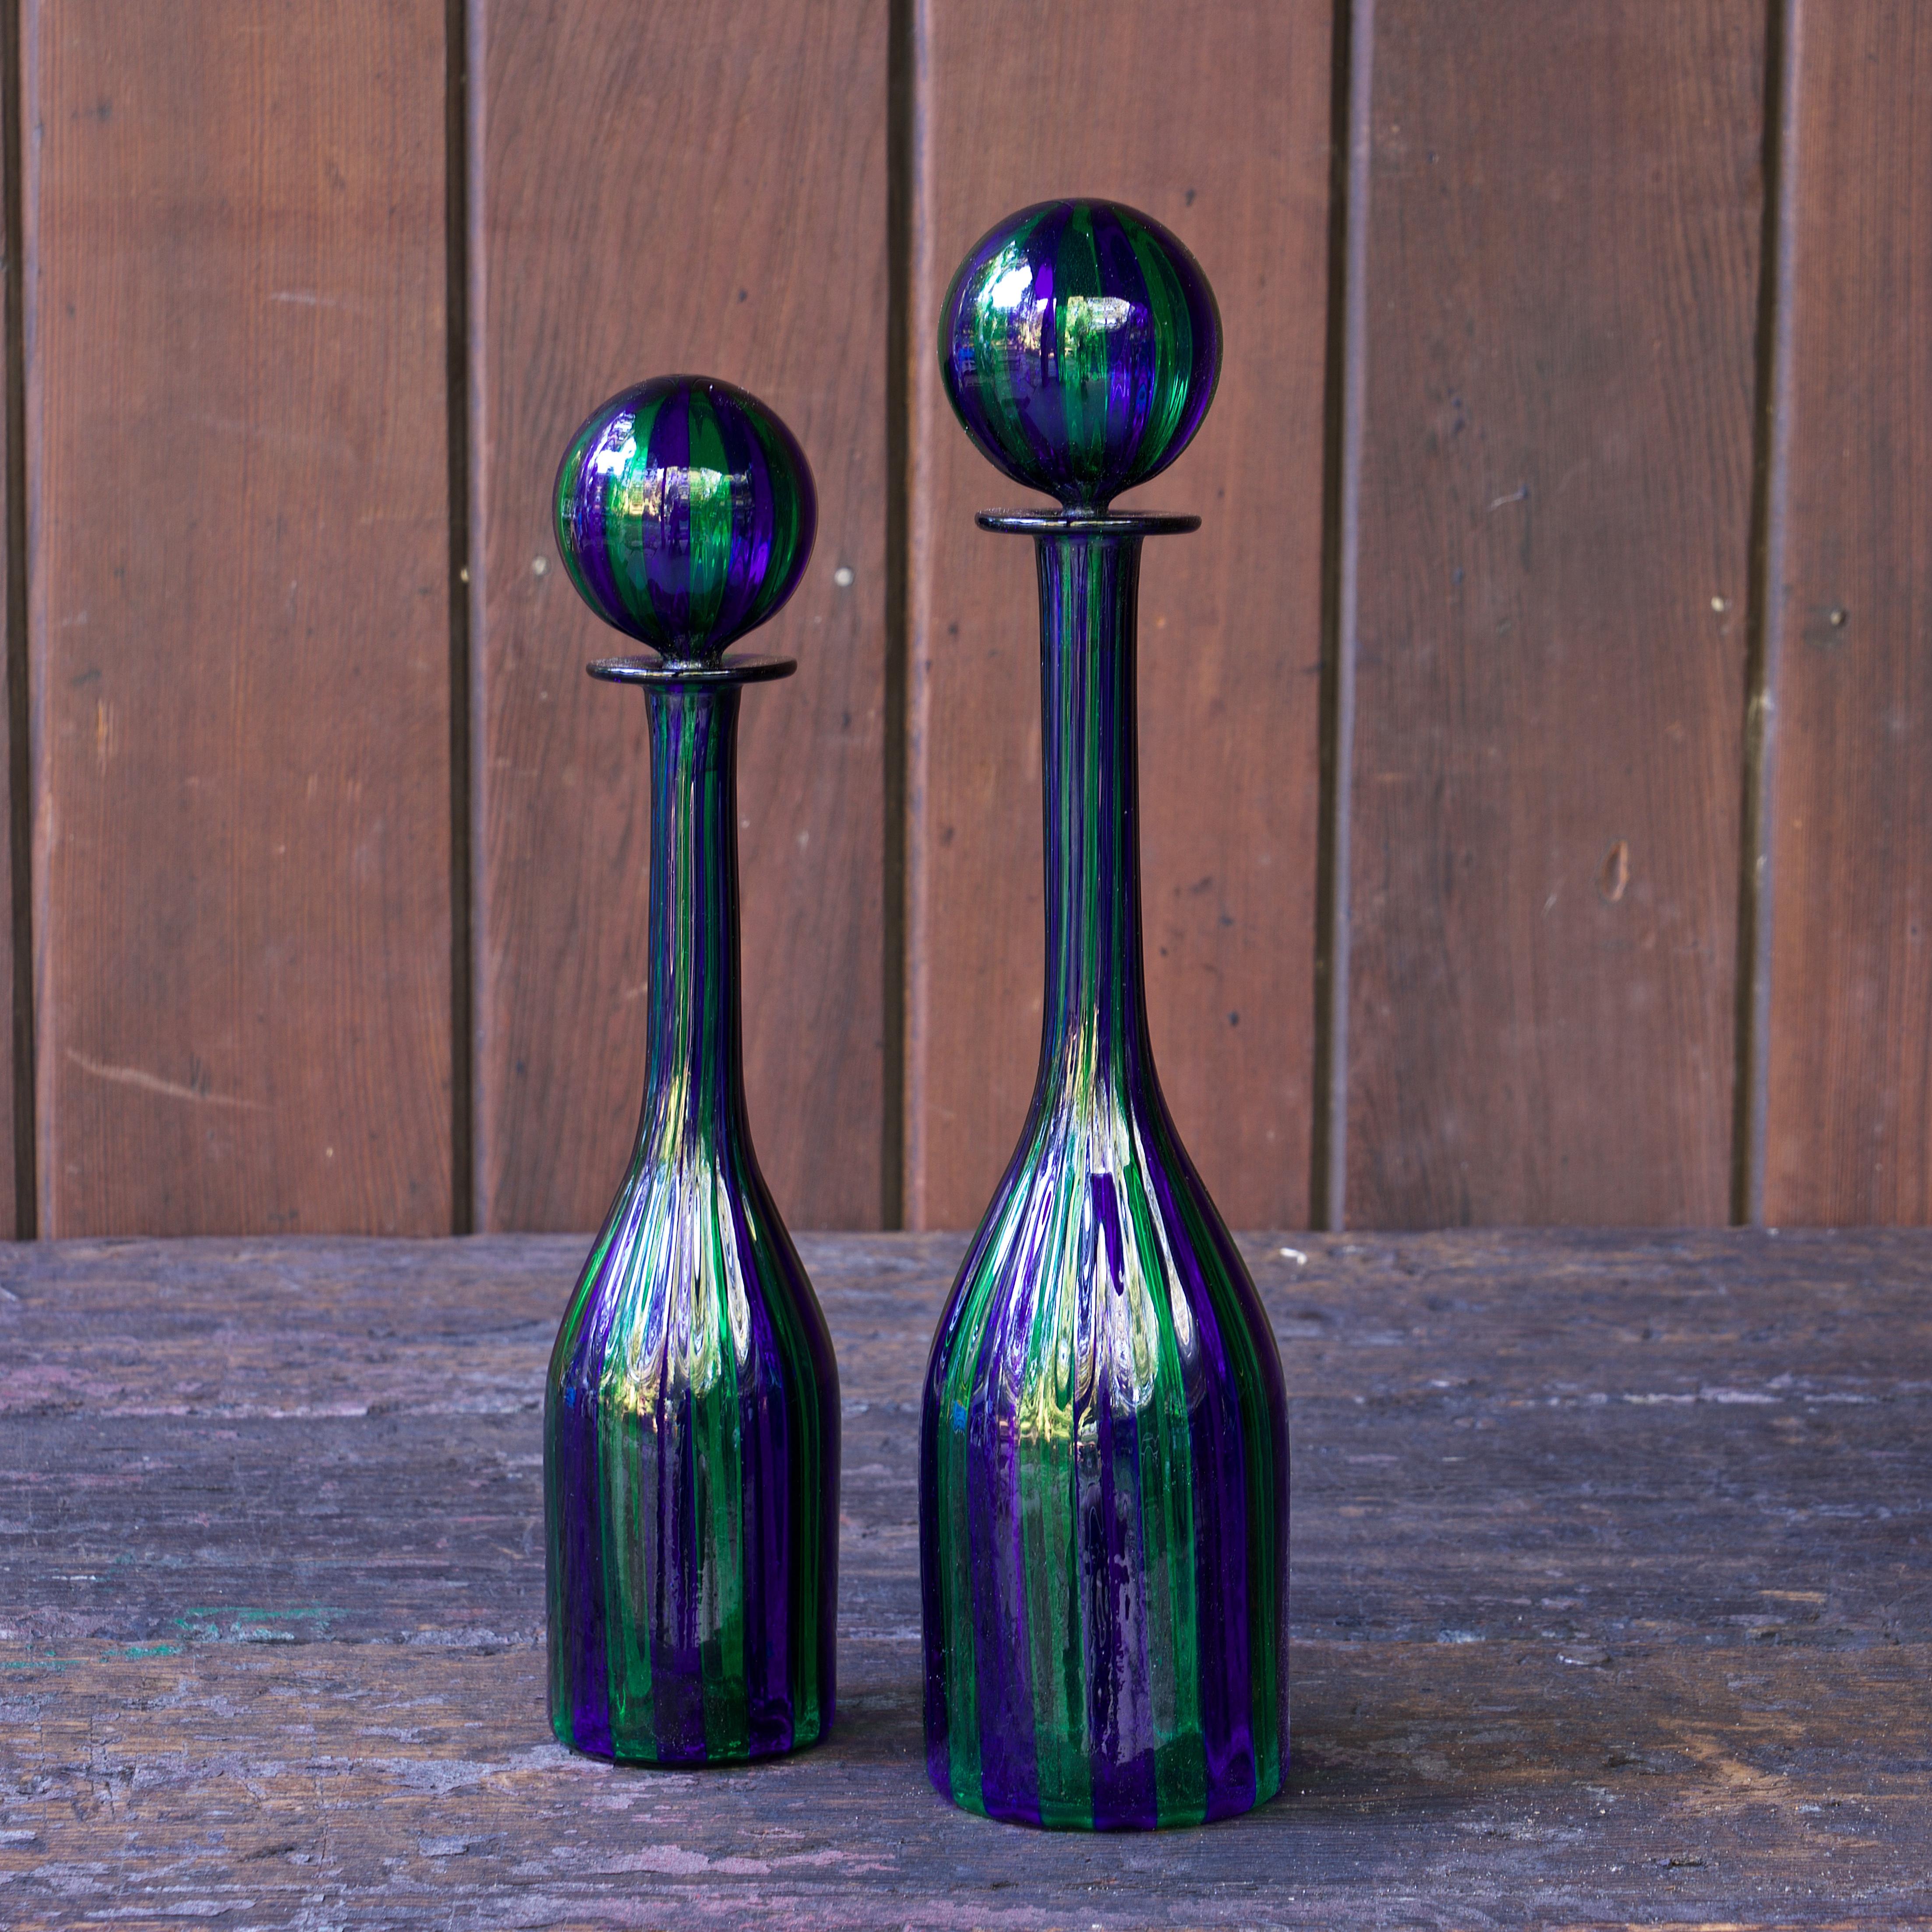 Unknown design/maker, unsigned, possibly Murano.

An amazing pair of hand-blown art glass bottles with matching stoppers.  Thin walled, striping all through botles and the stoppers.  High quality mid-century made. Both have small pontil marks to